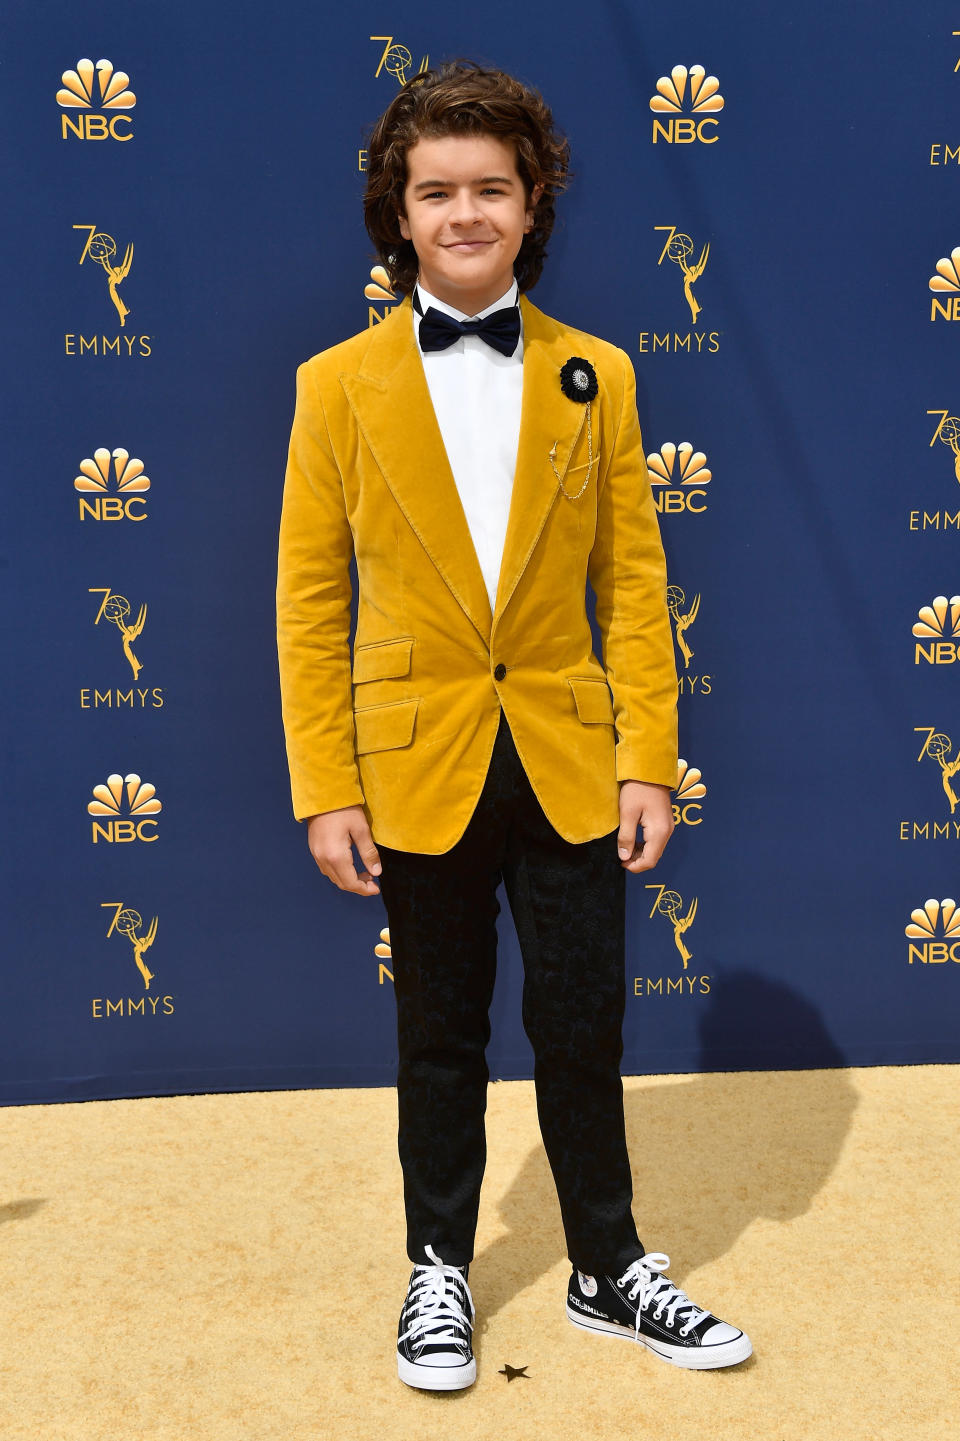 <p>Gaten Matarazzo attends the 70th Emmy Awards at Microsoft Theater on Sept. 17, 2018, in Los Angeles. (Photo by Frazer Harrison/Getty Images) </p>